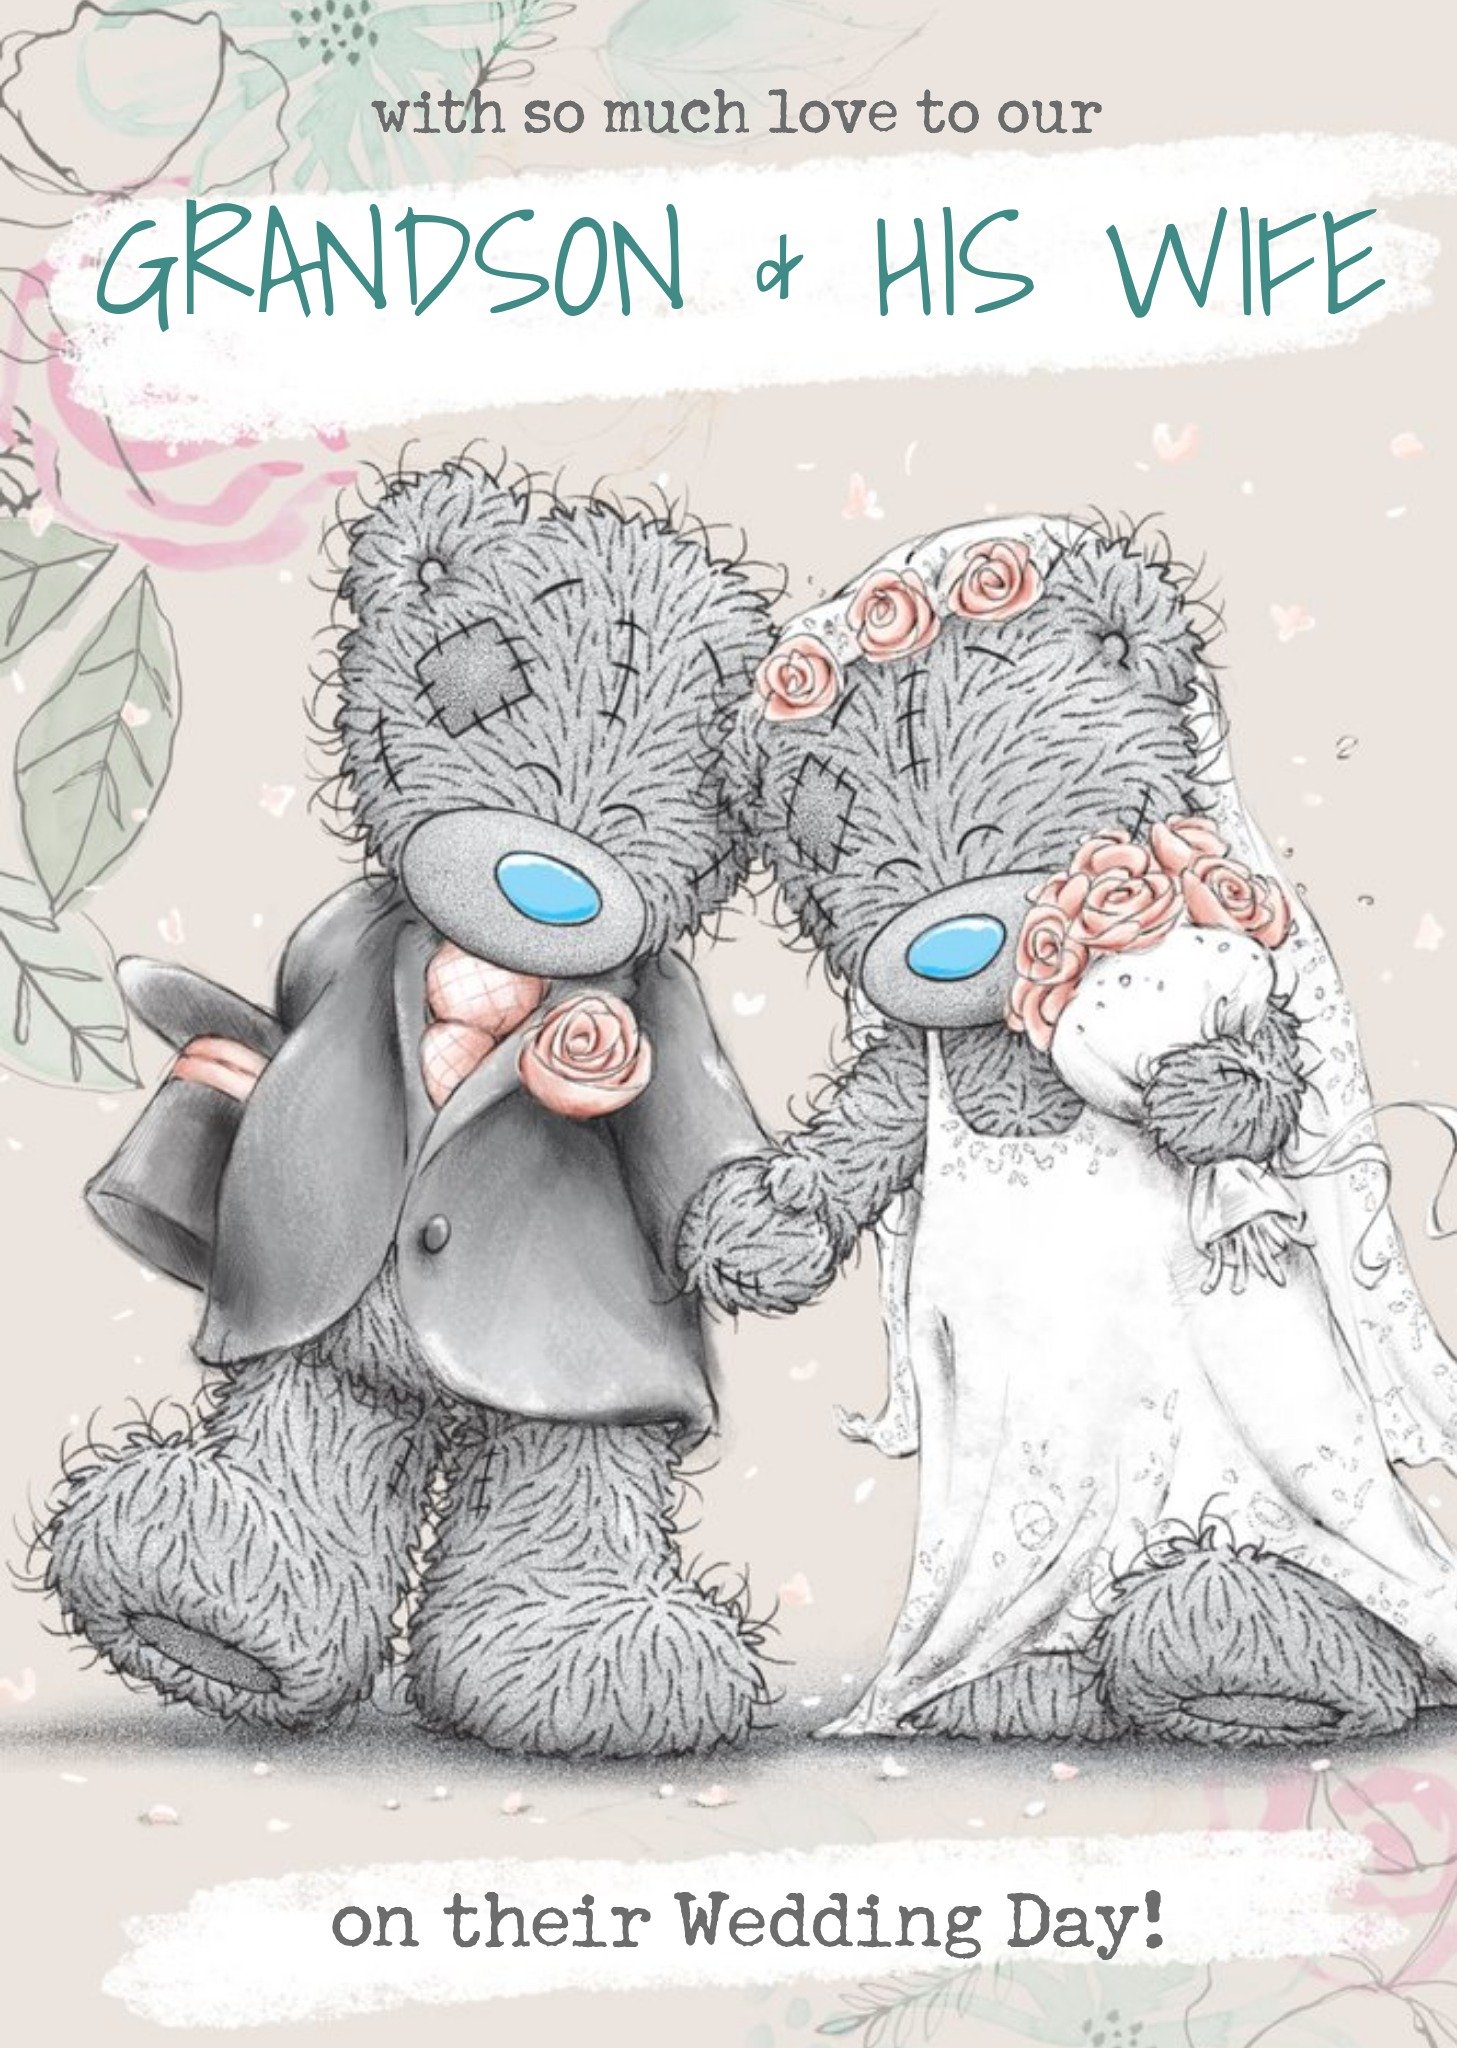 Me To You Tatty Teddy To Our Grandson And His Wife On Your Wedding Day Wedding Card, Large